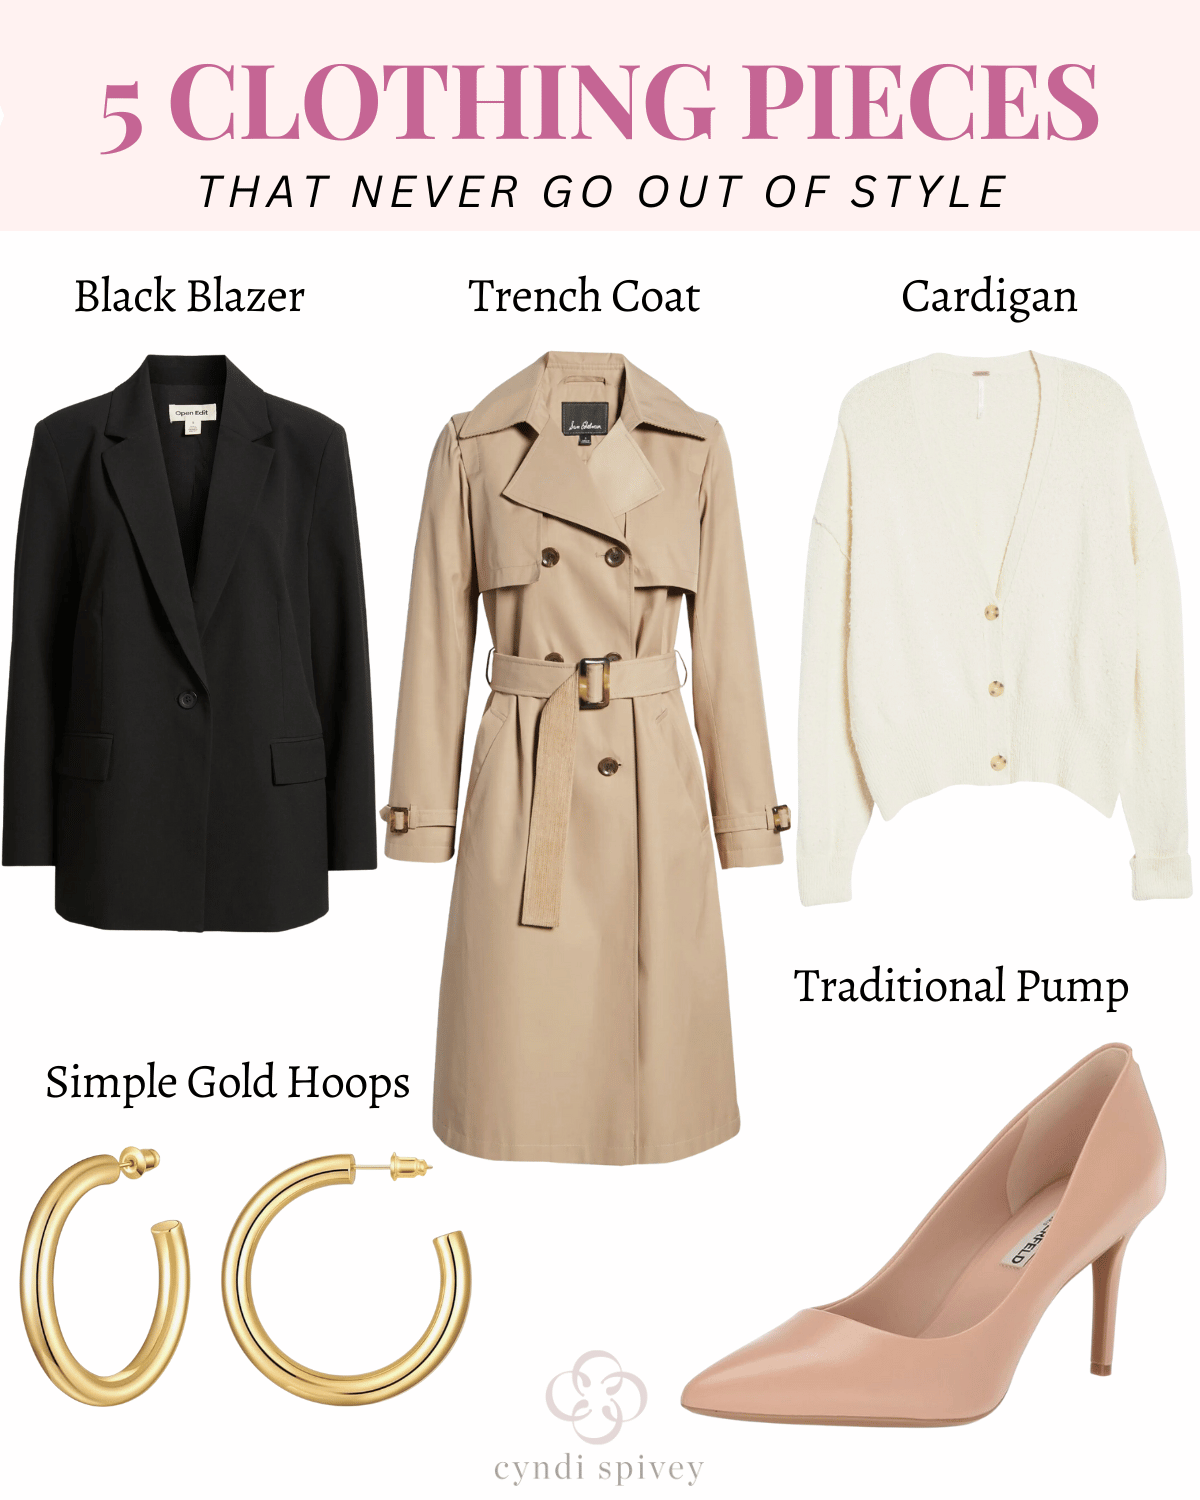 fashion blog, fashion blogger, fashion favorites, 5 clothing pieces that never go out of style, timeless pieces, fashion finds, classic staple pieces, closet must haves, closet essentials, wardrobe staples, wardrobe basics, neutral fashion pieces, fall closet basics, fashion essentials